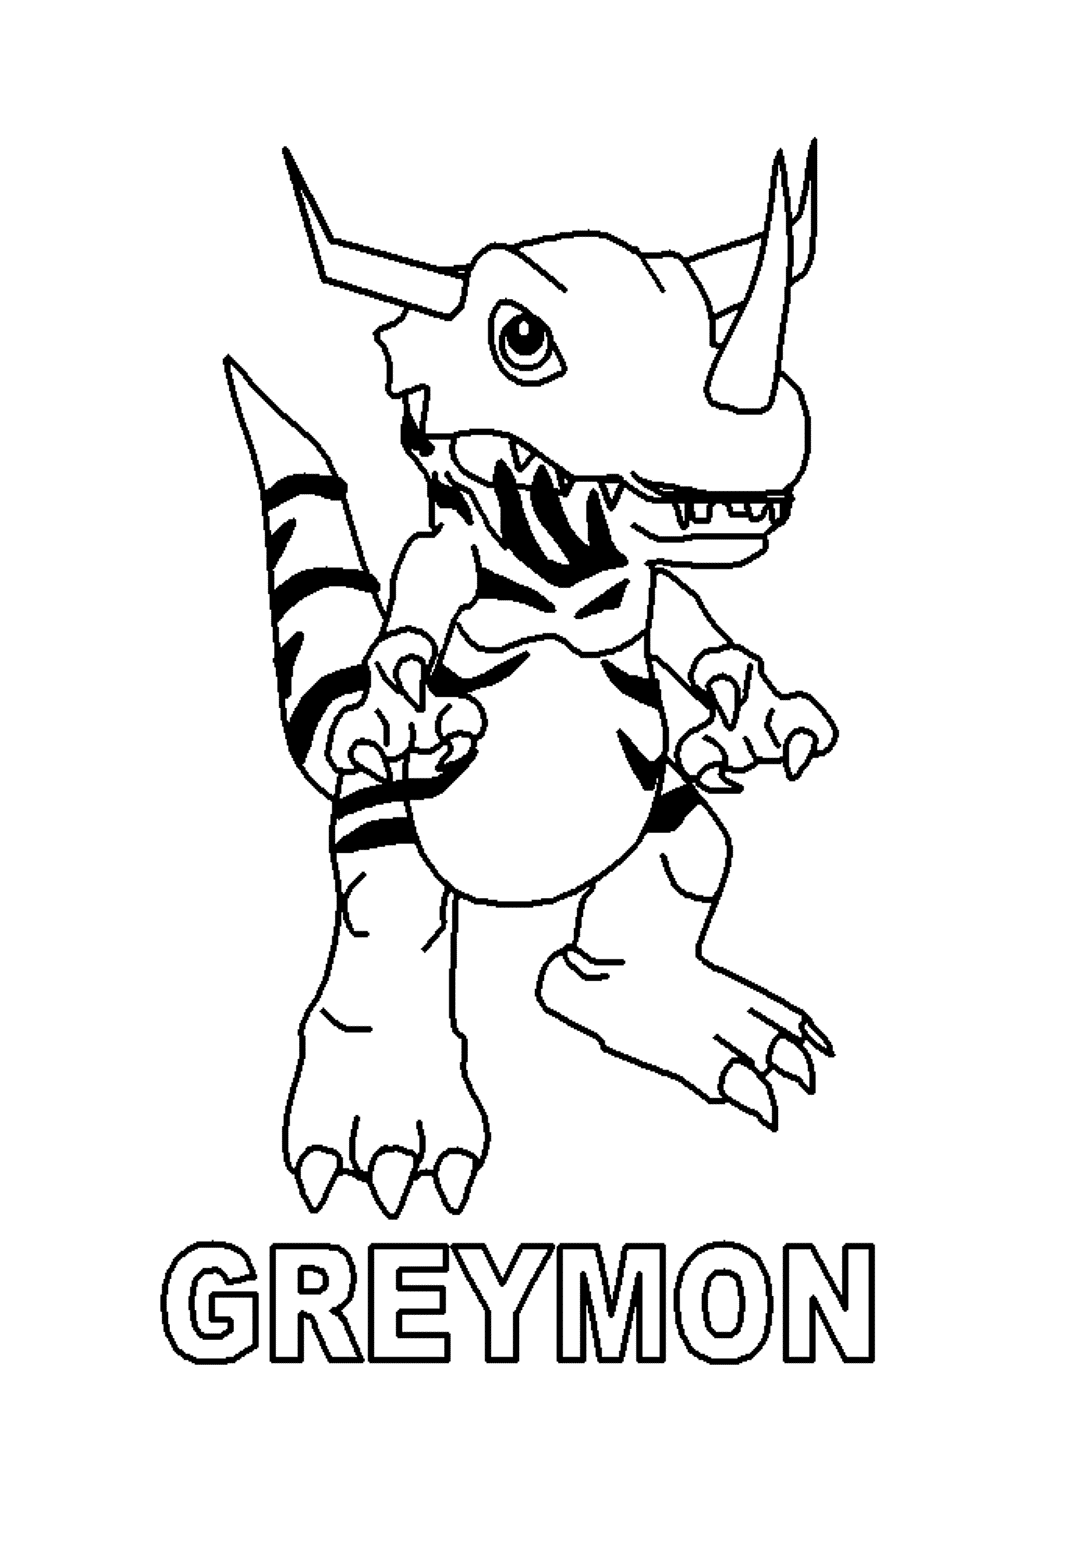 digimon greymon coloring pages Coloring4free